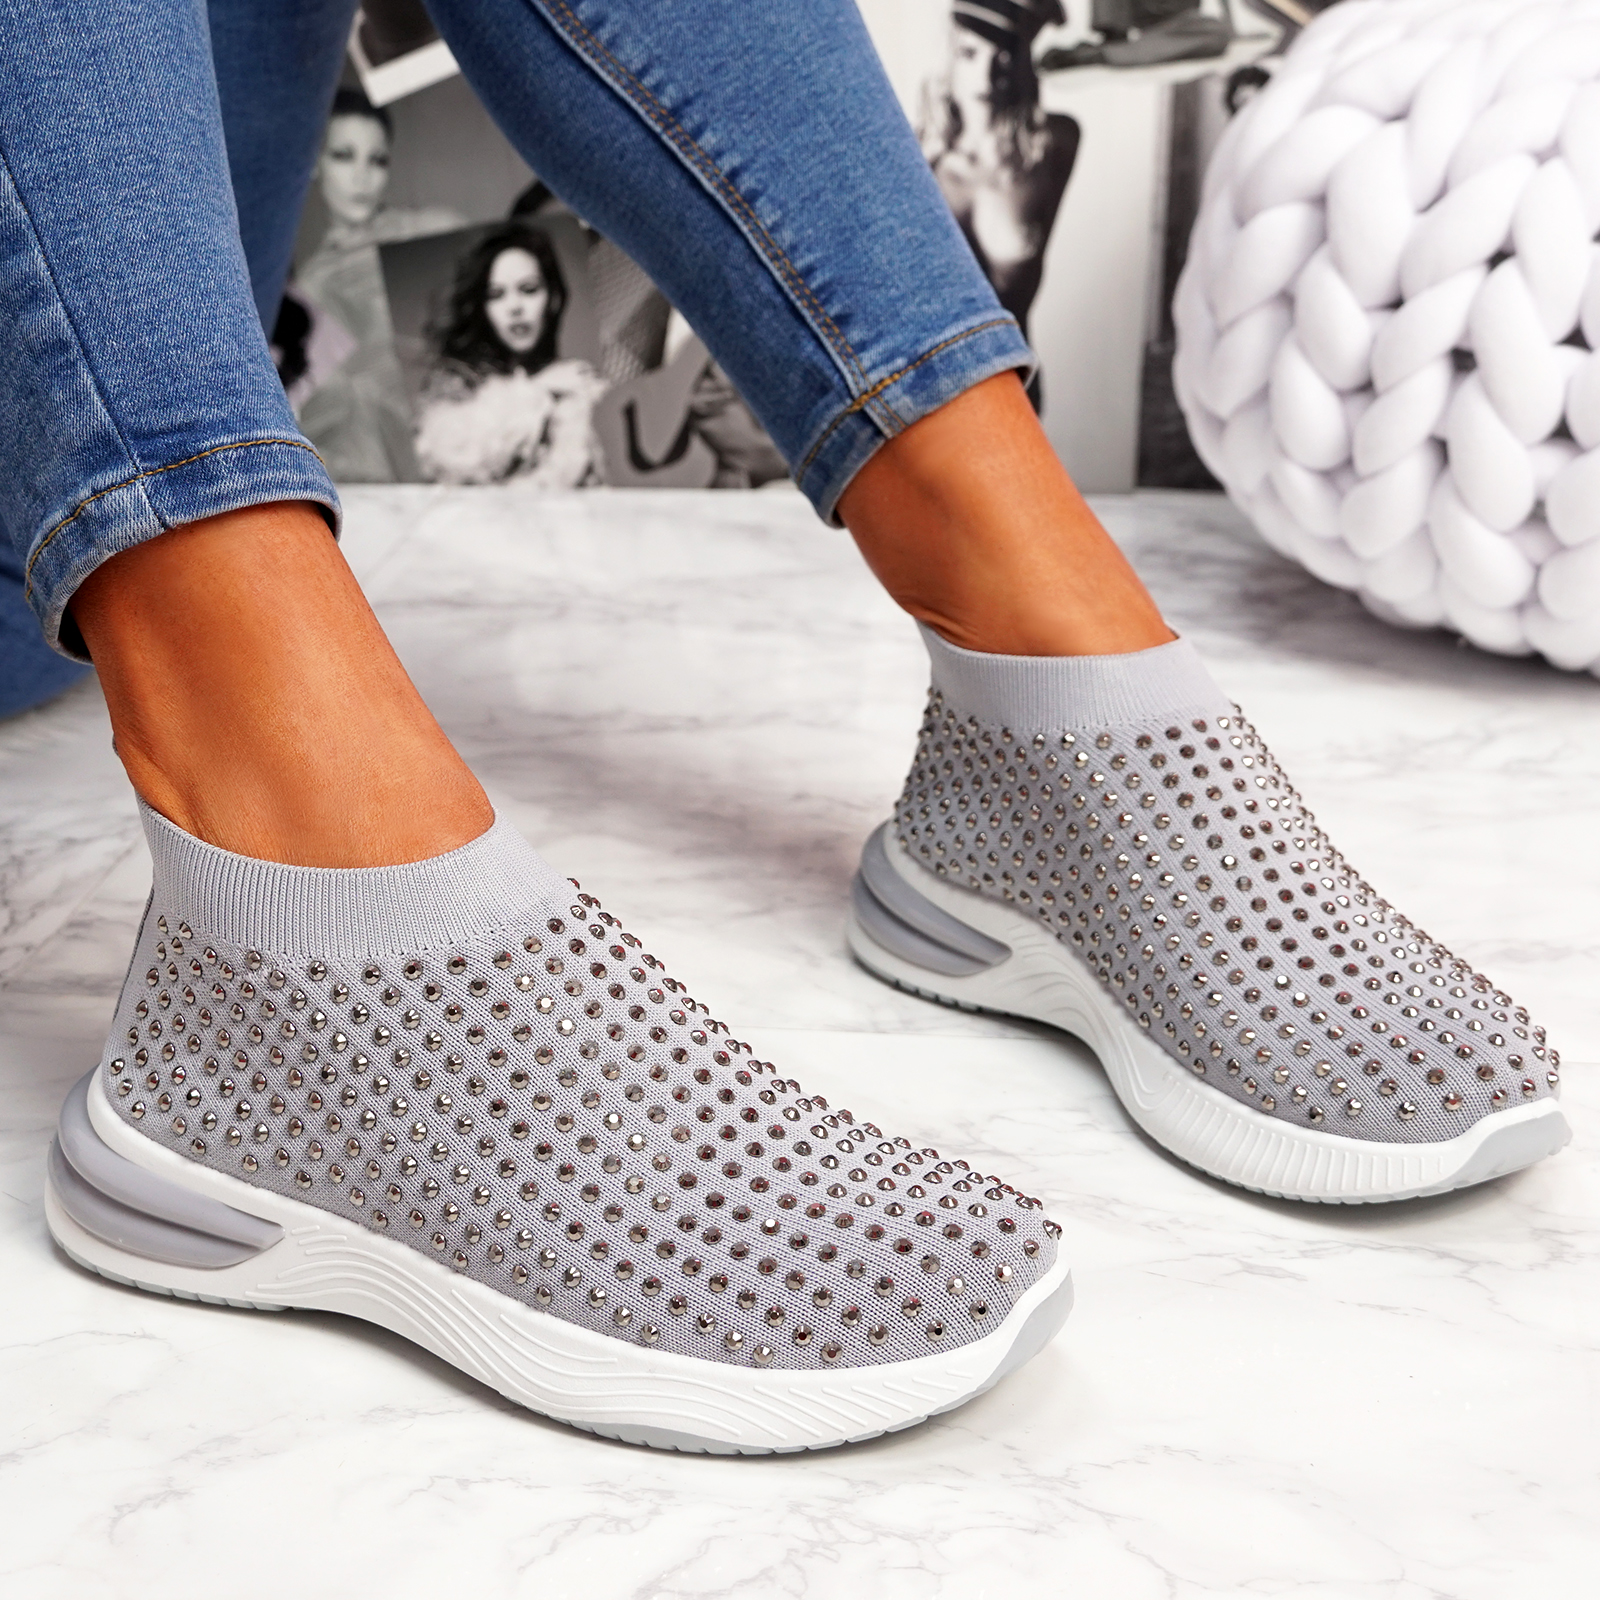 WOMENS LADIES DIAMANTE STUDDED SOCK SLIP ON SNEAKERS PARTY TRAINERS ...